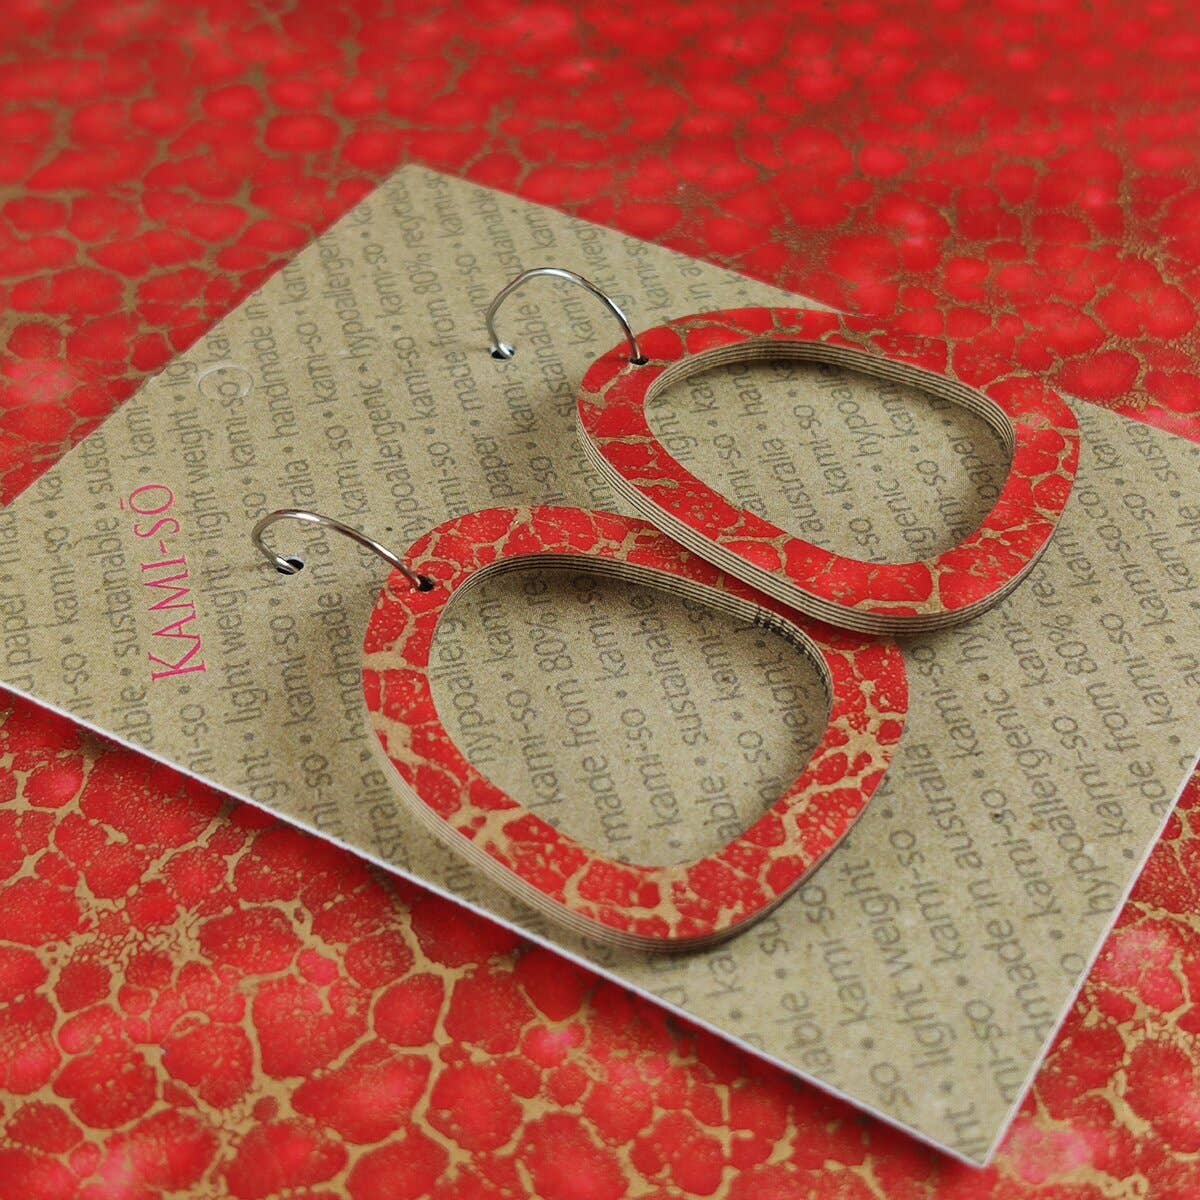 KAMI-SO- Square Recycled Paper Earrings - Red & Gold Crackle: Large Hoop